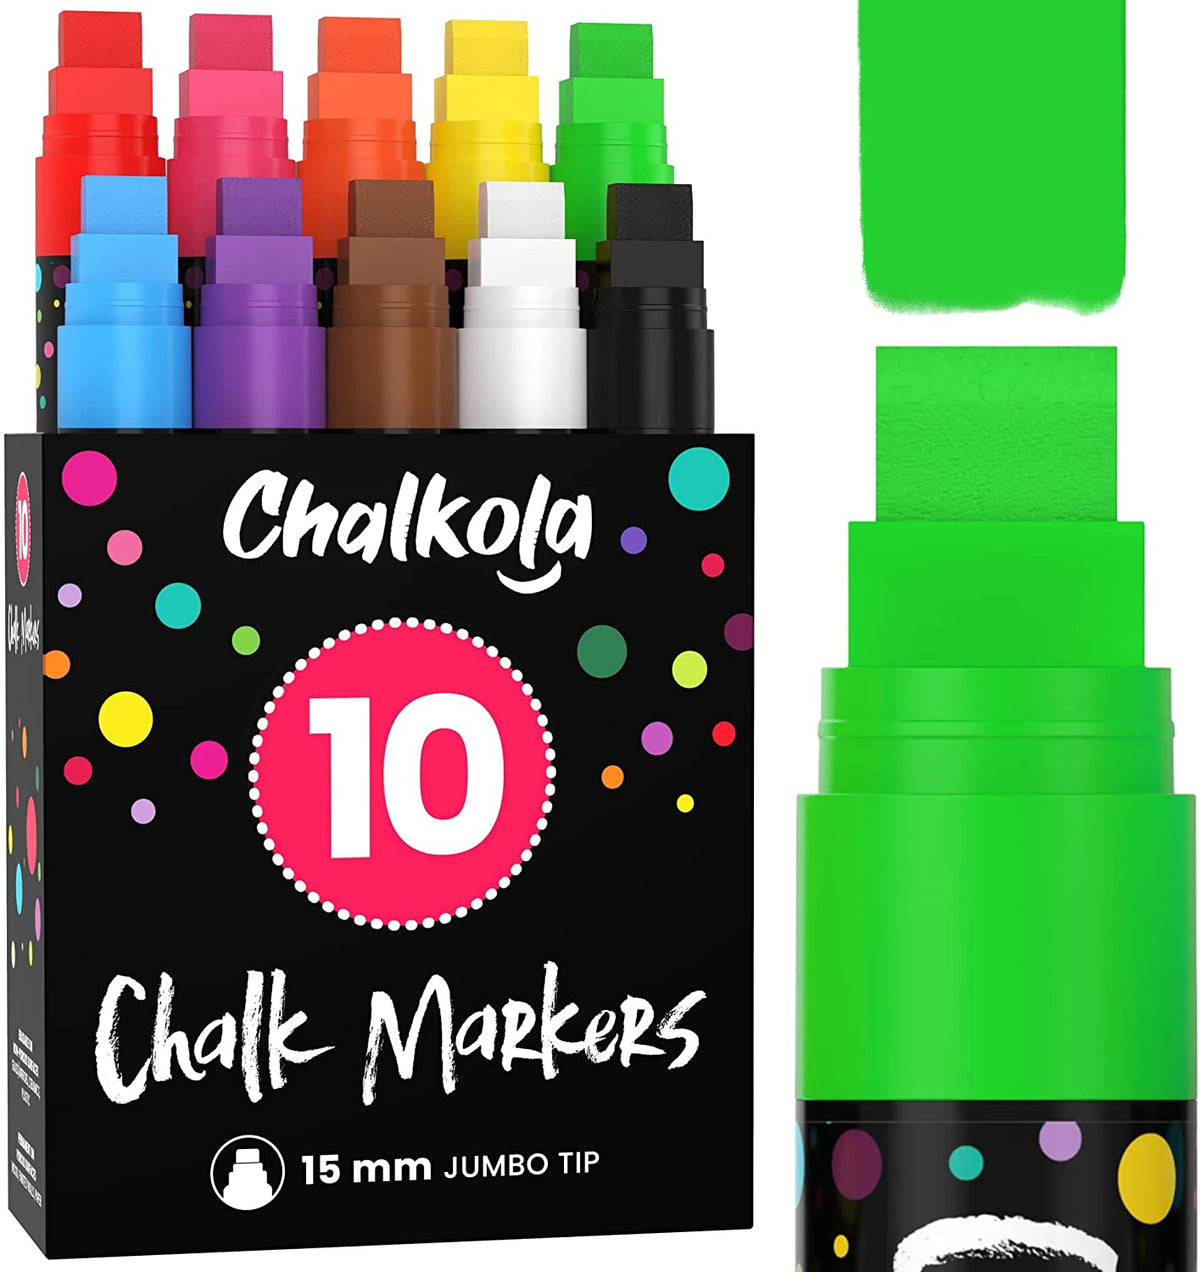  Classic Chalk Markers For Chalkboard Liquid Chalk Pen 10 Pack  5mm Bold Tip Neon Chalk - Washable and Erasable : Office Products